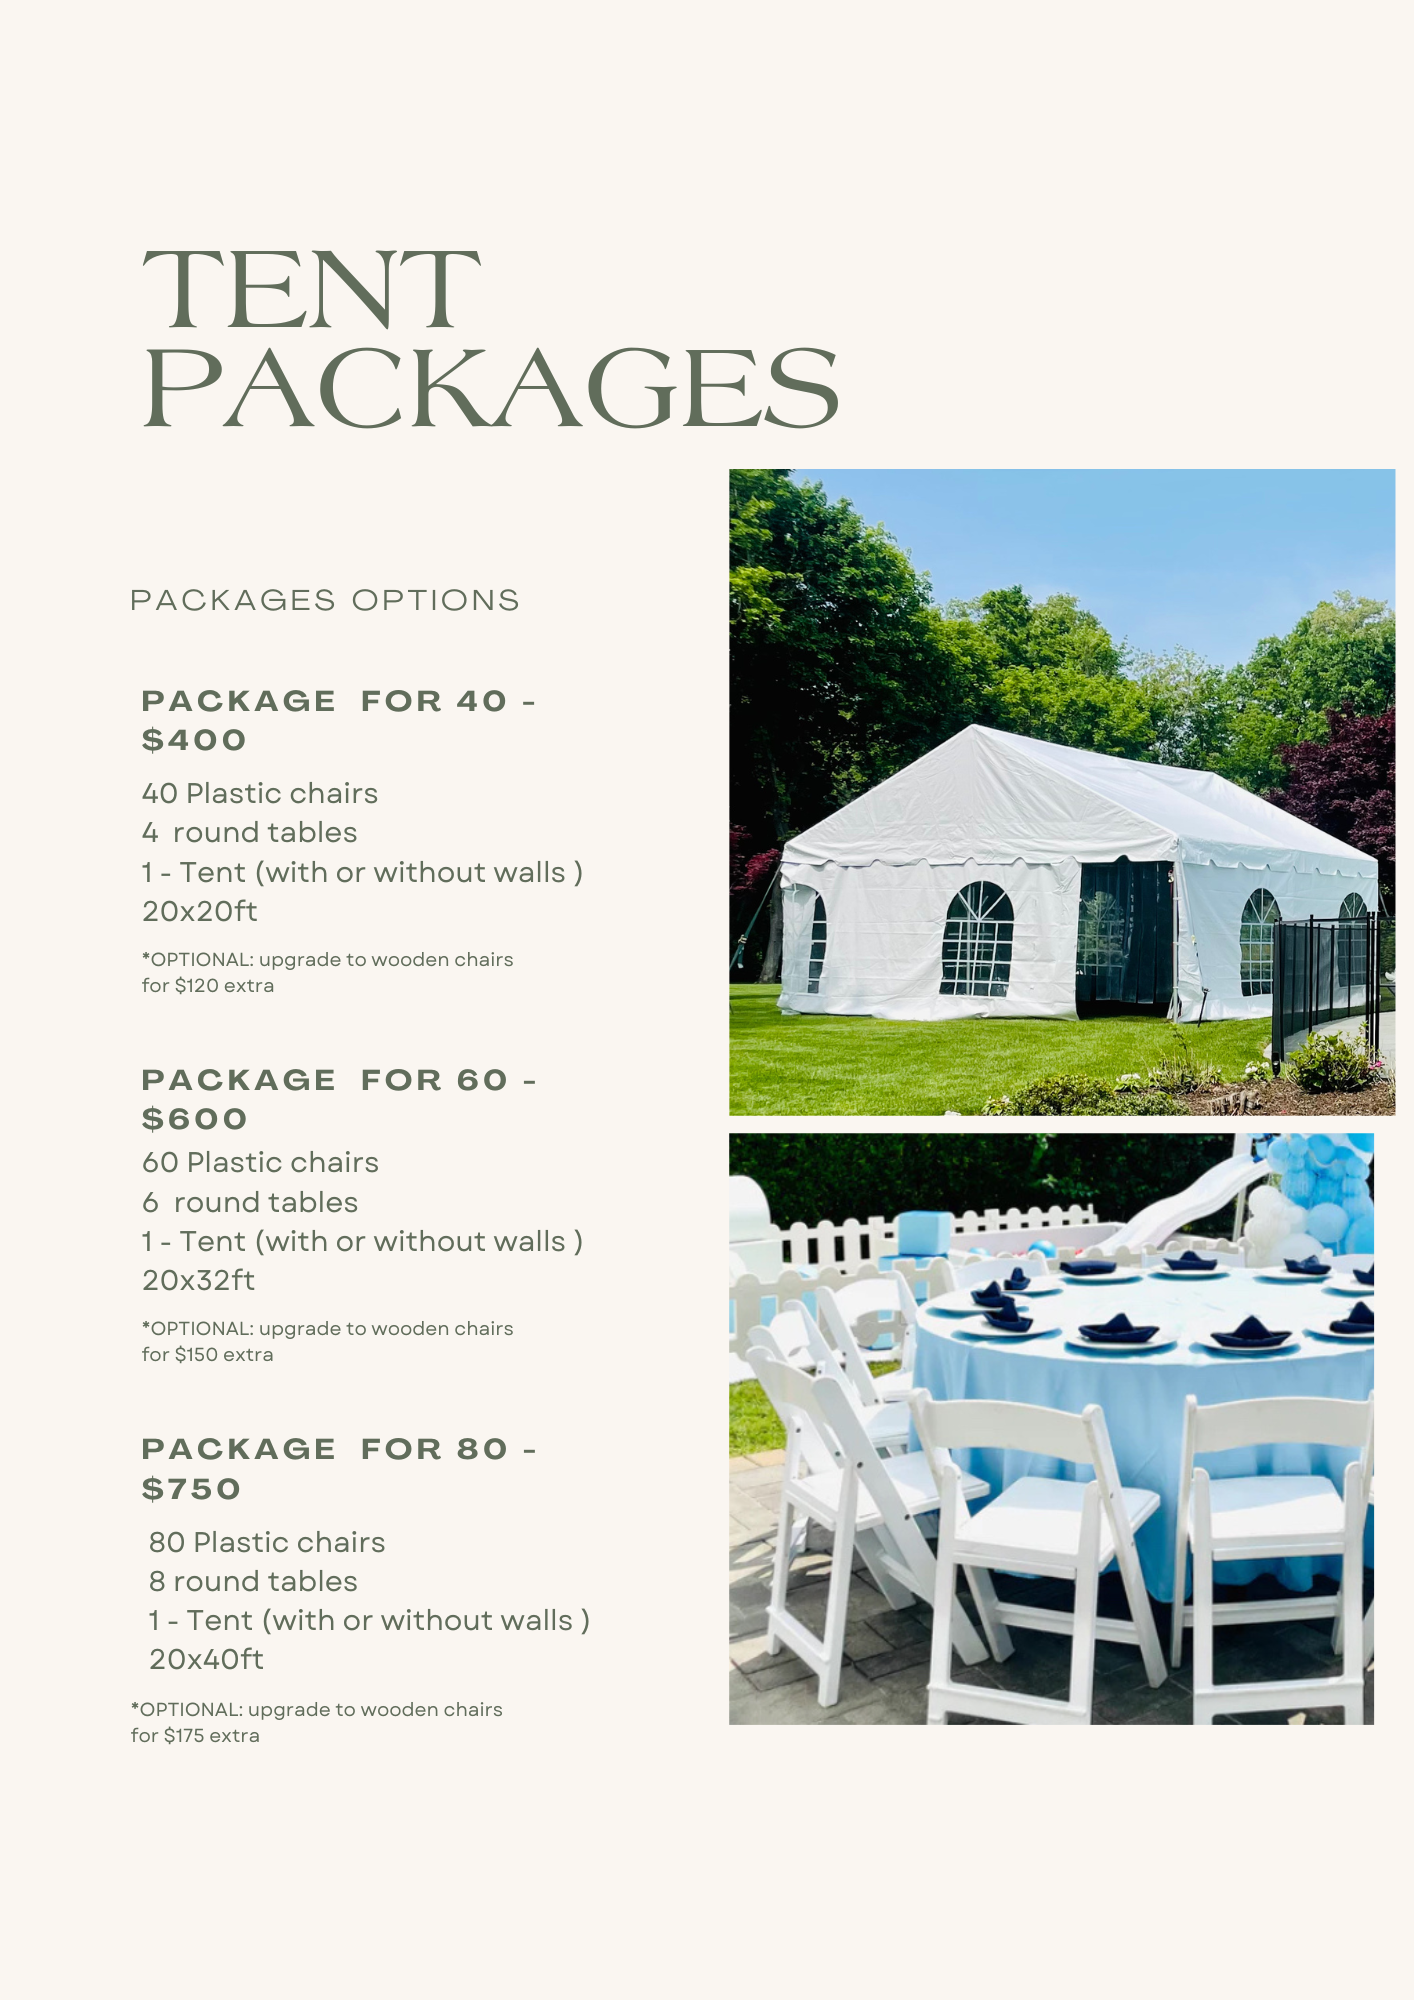 TENT PACKAGES